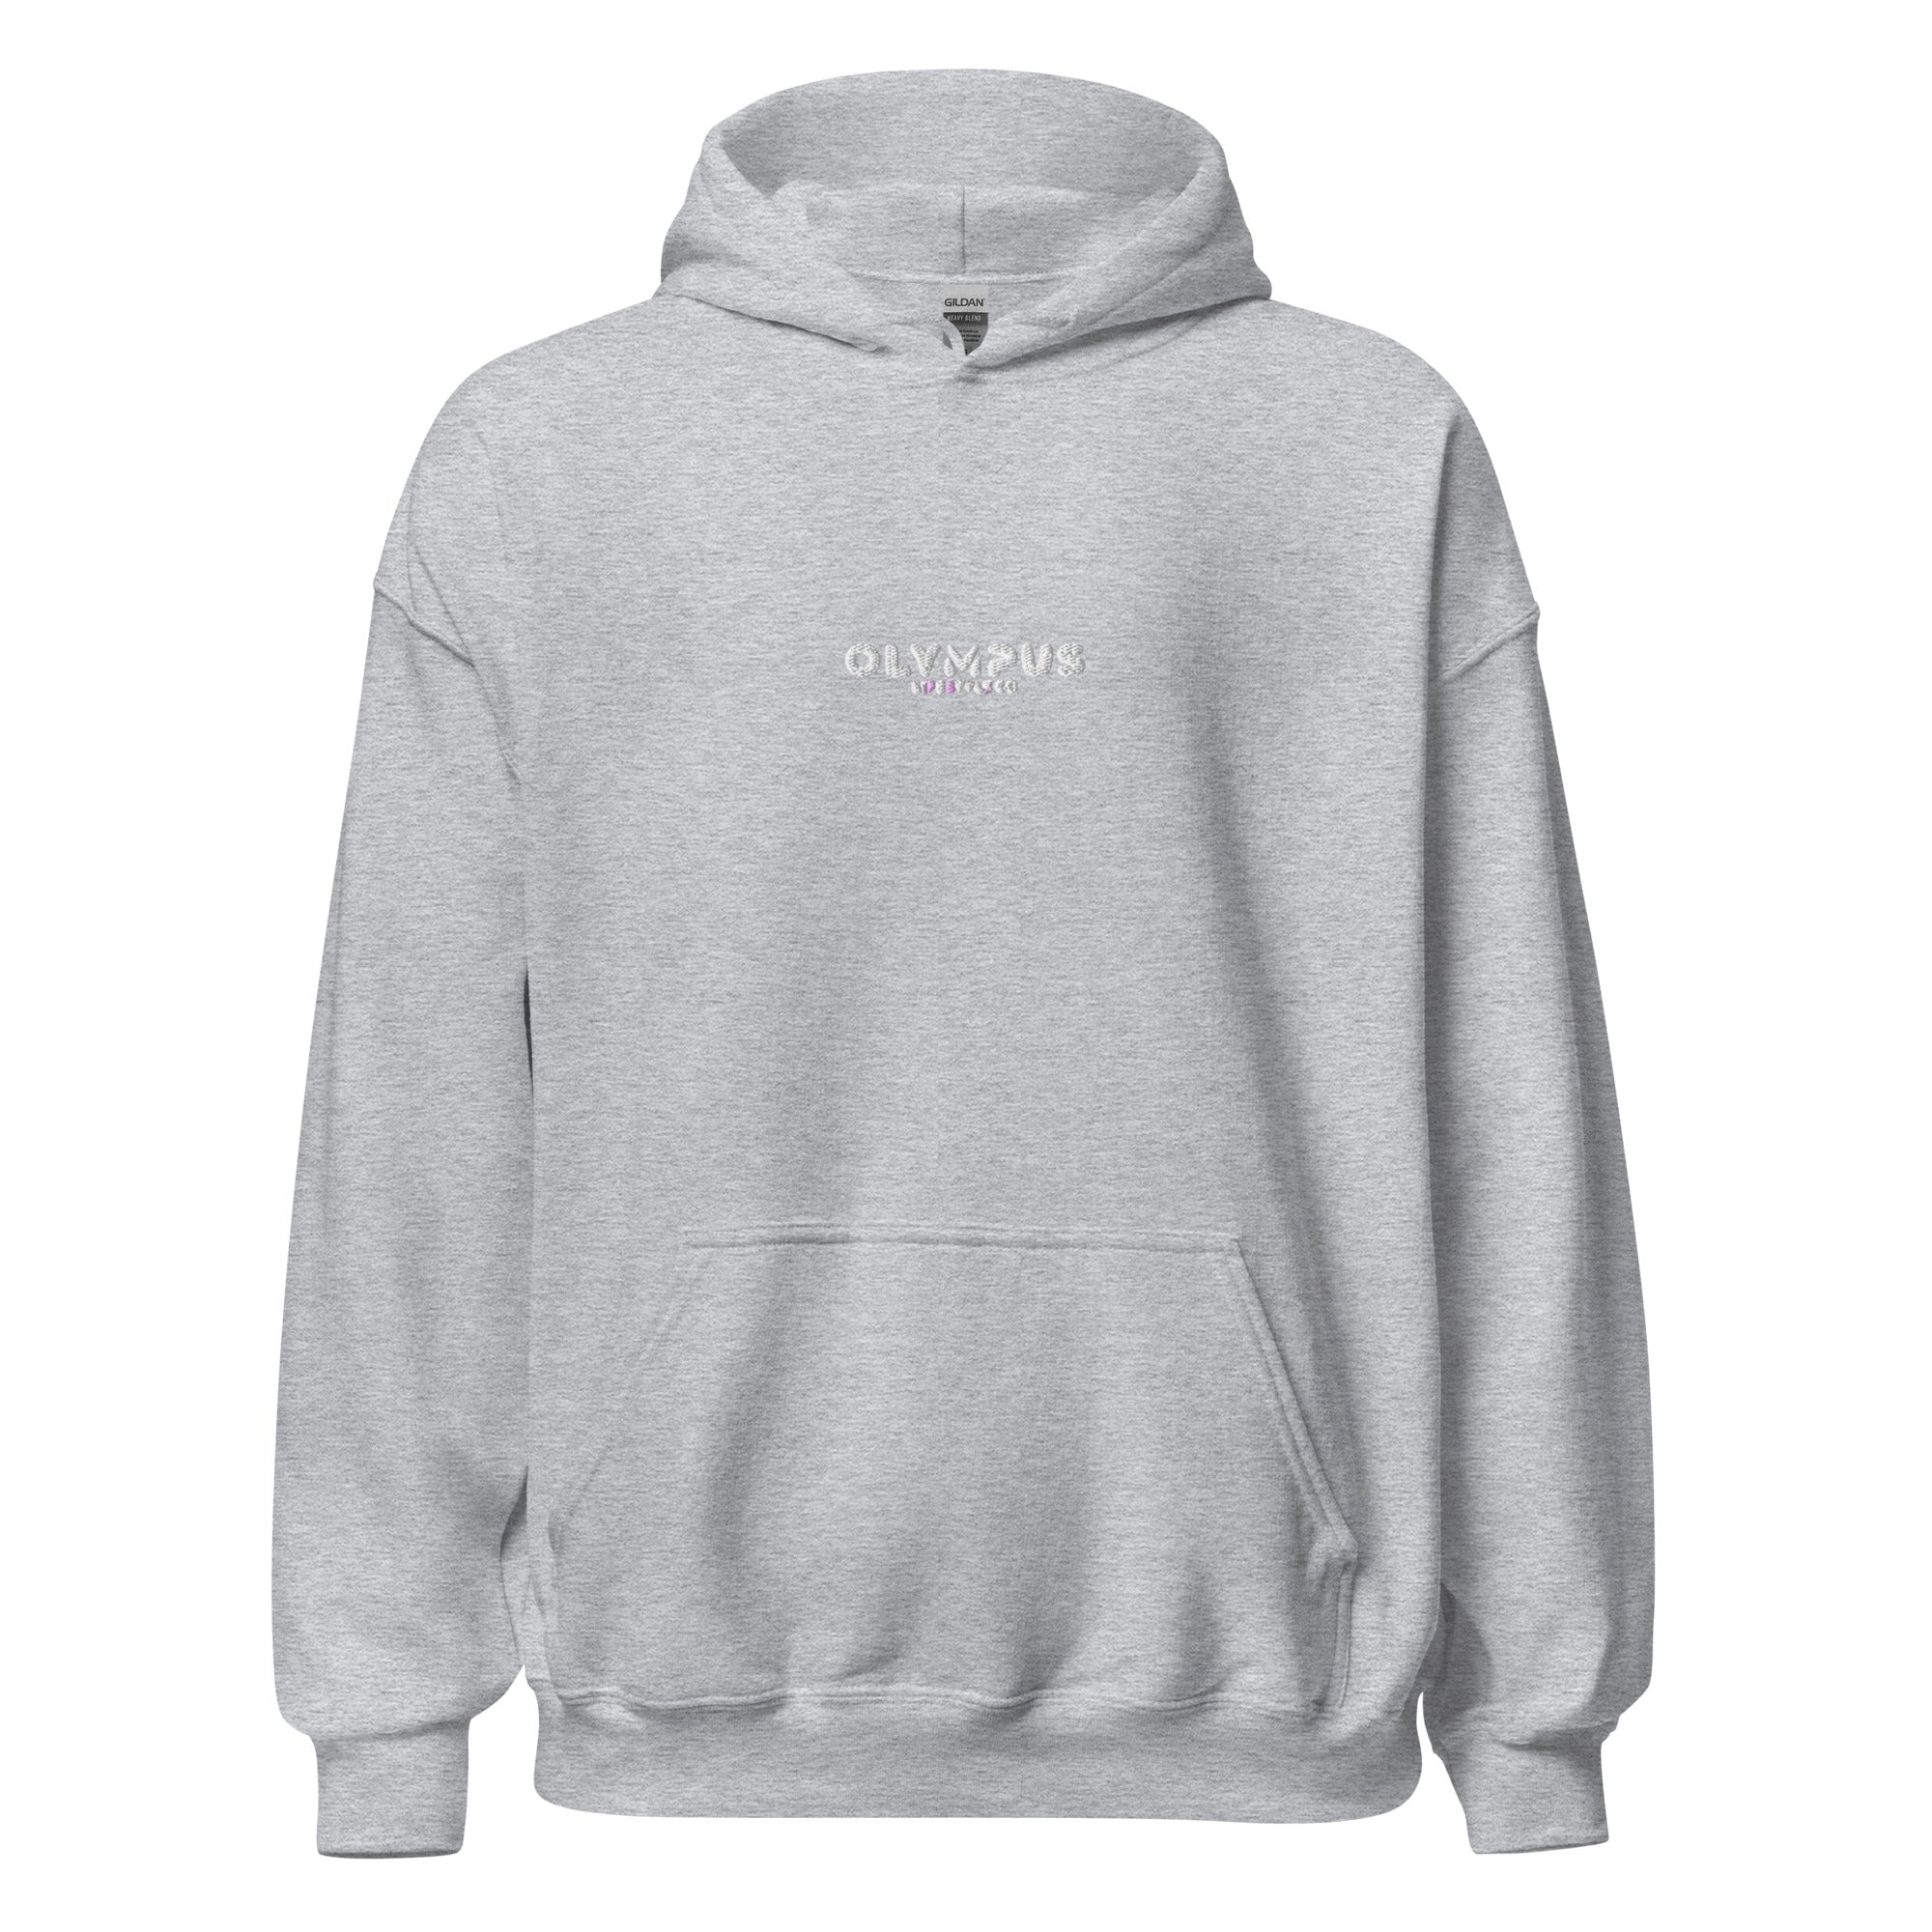 Olympus Men's Embroidered Hoodie White Text Logo